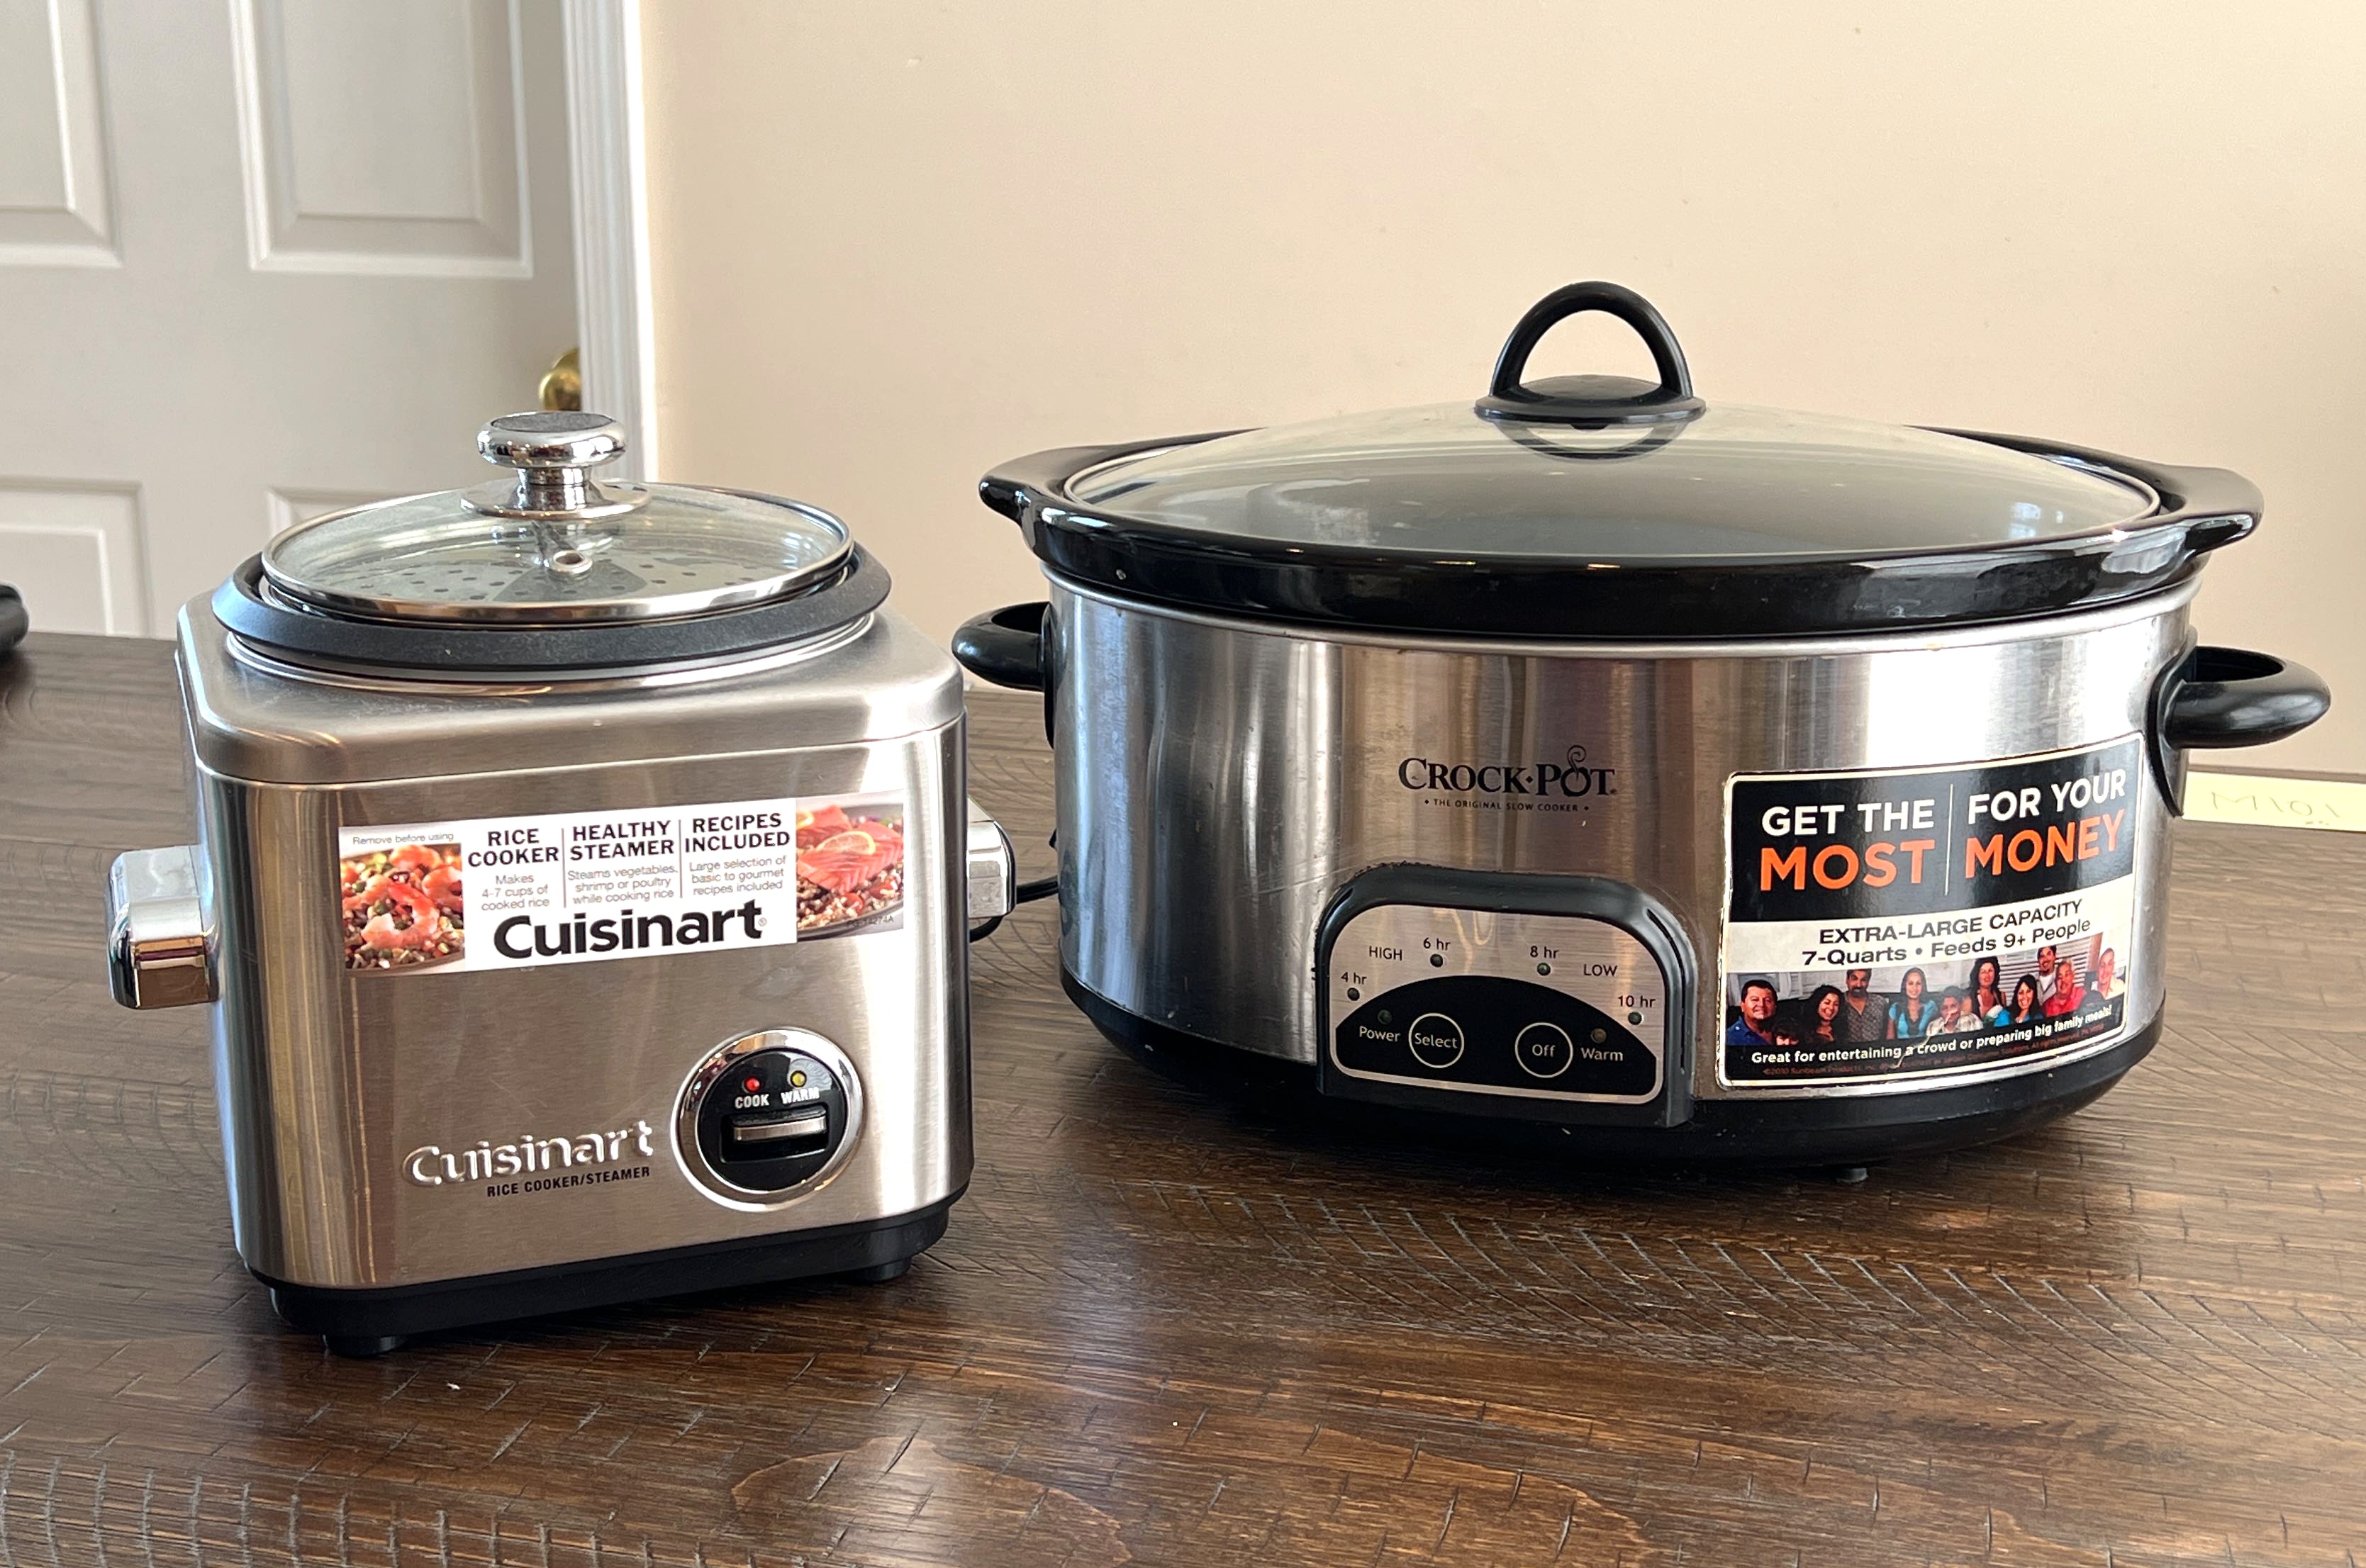 Cuisinart 4 Cup Rice Cooker And Steamer for Sale in San Diego